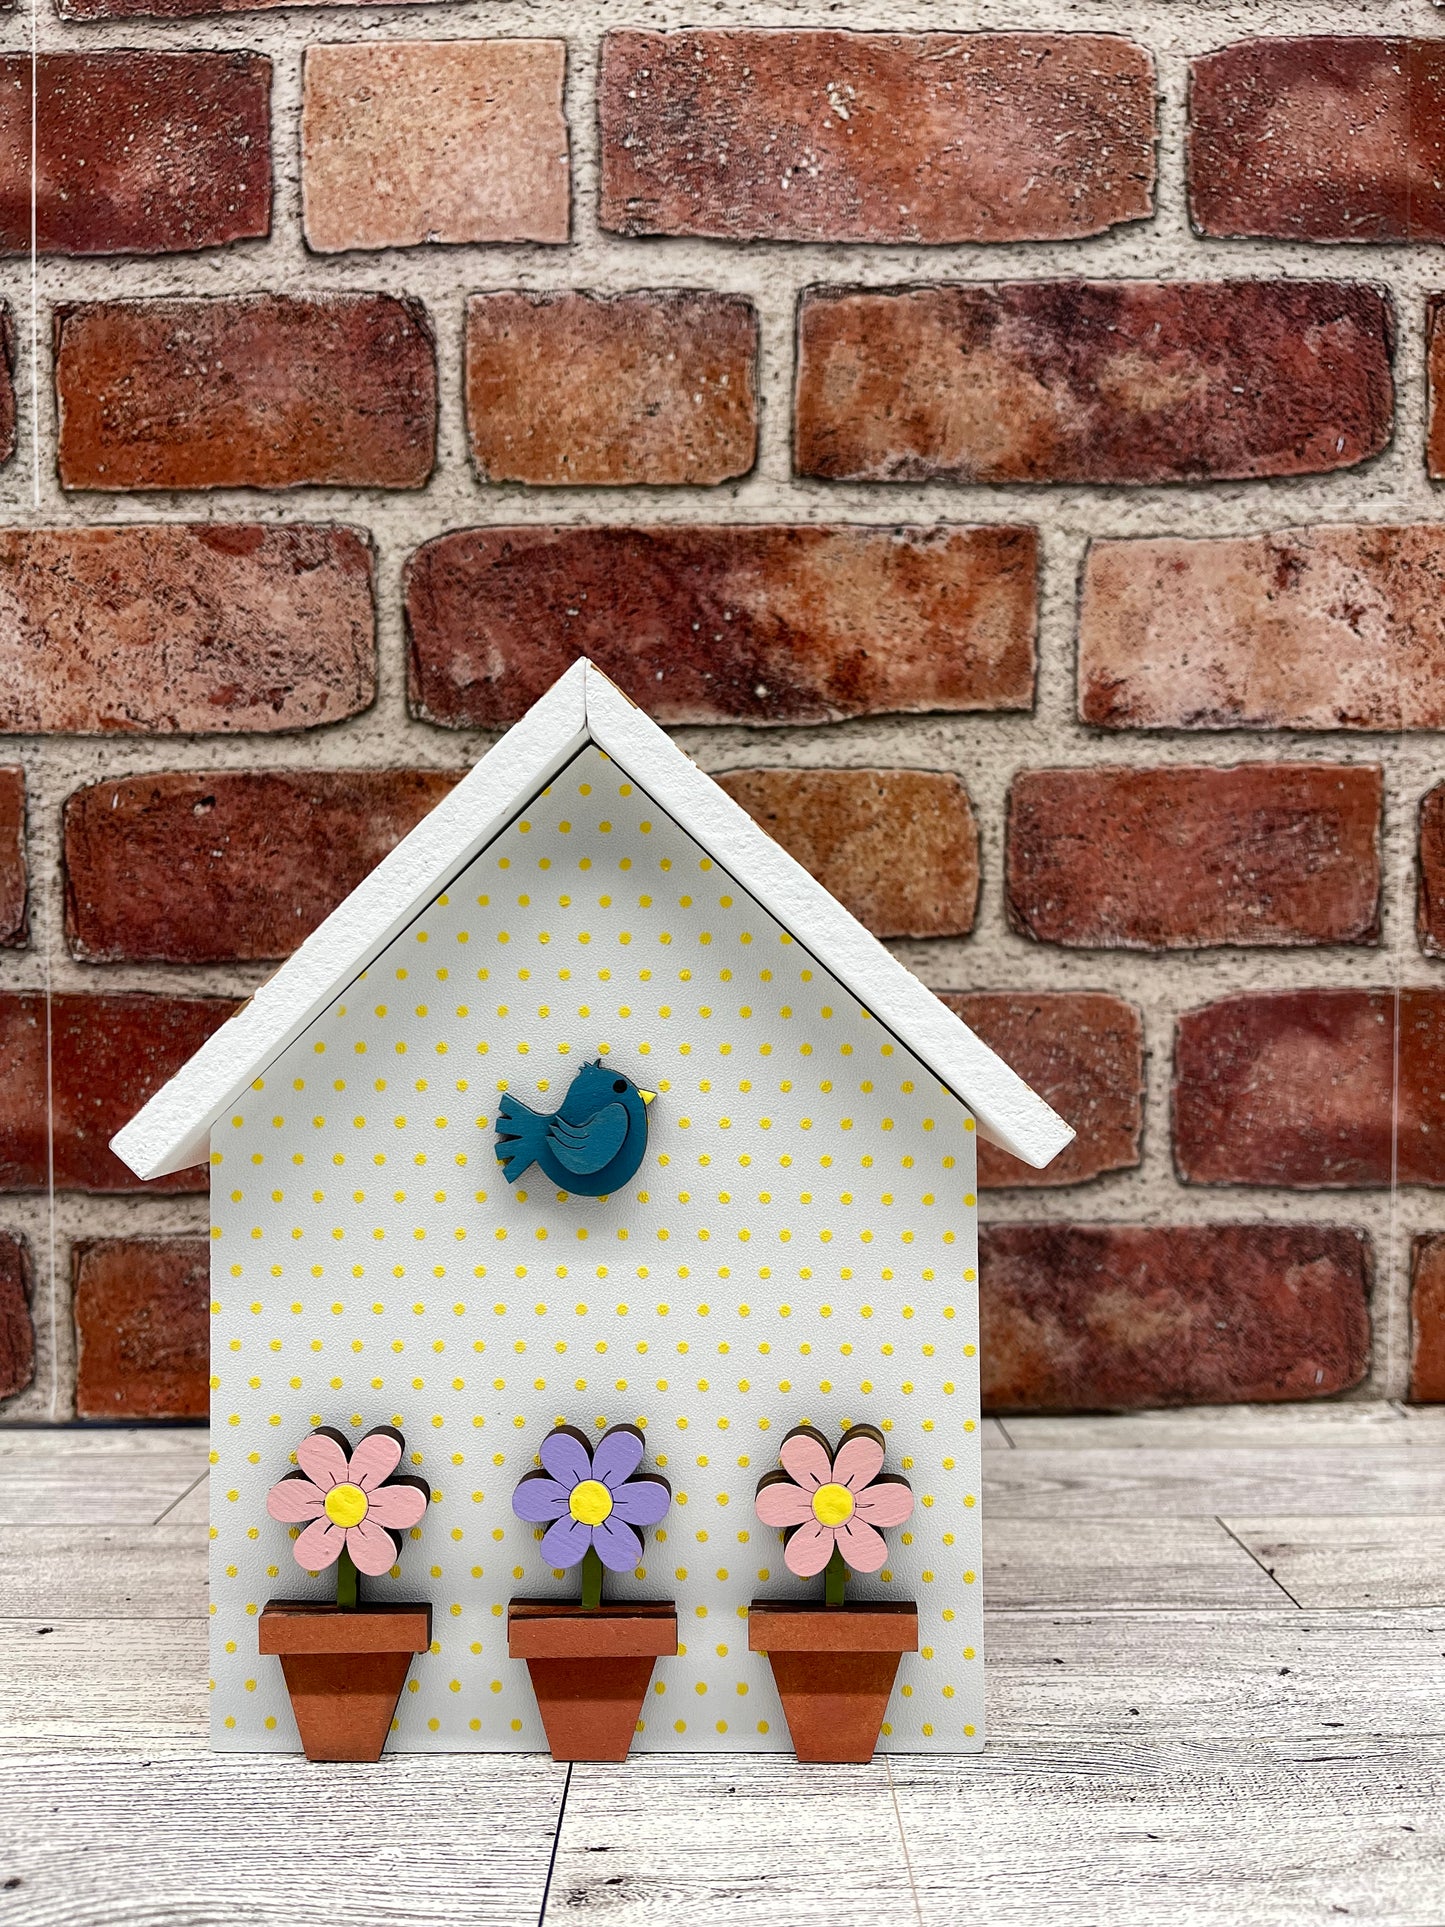 Birdhouse cutouts add on Kit - Wood Cutouts unpainted ready for you to paint